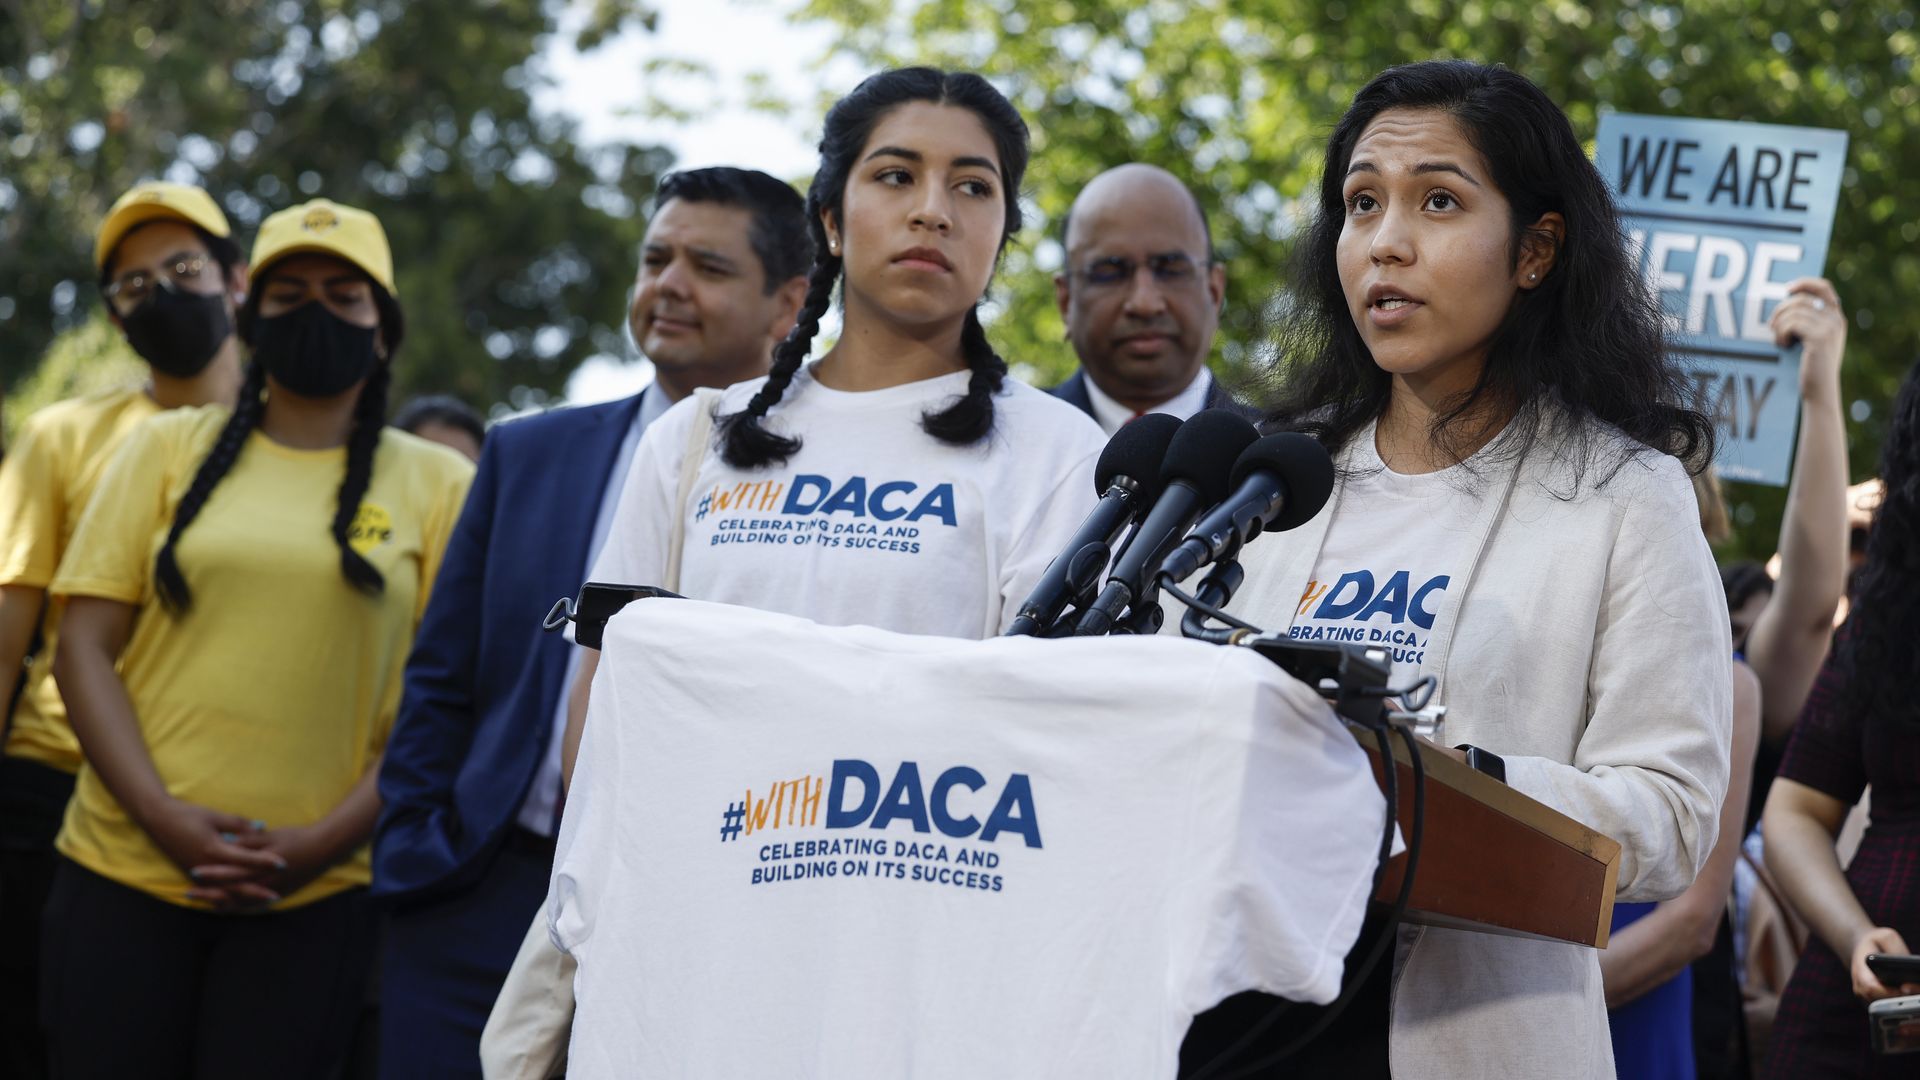 Photo of two activists speaking while holding a T-shirt that says "#WithDACA"